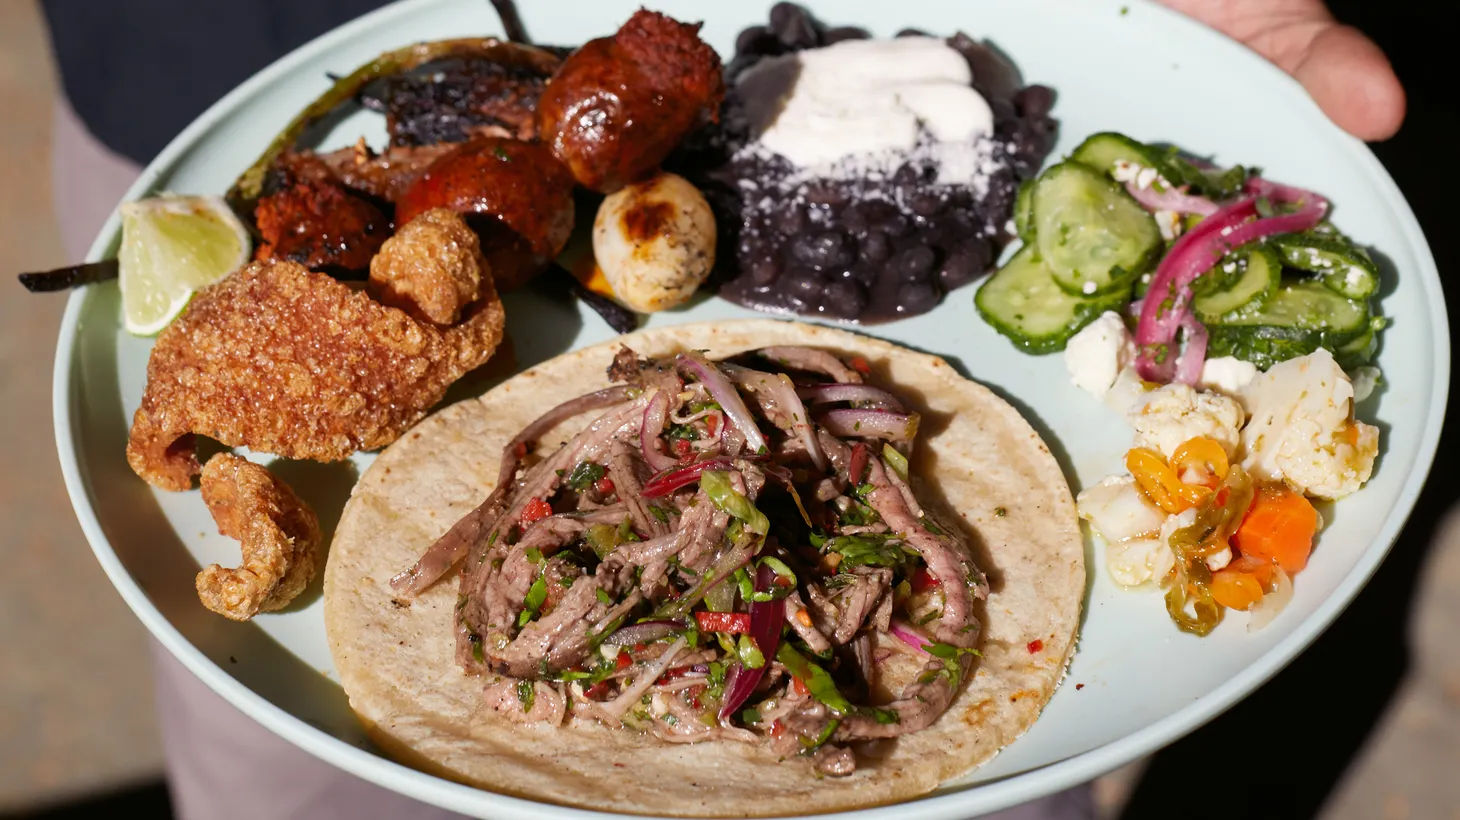 A plate of carne asada is the perfect thing to eat at an asada, a casual grilling party typically held in a backyard or a park.